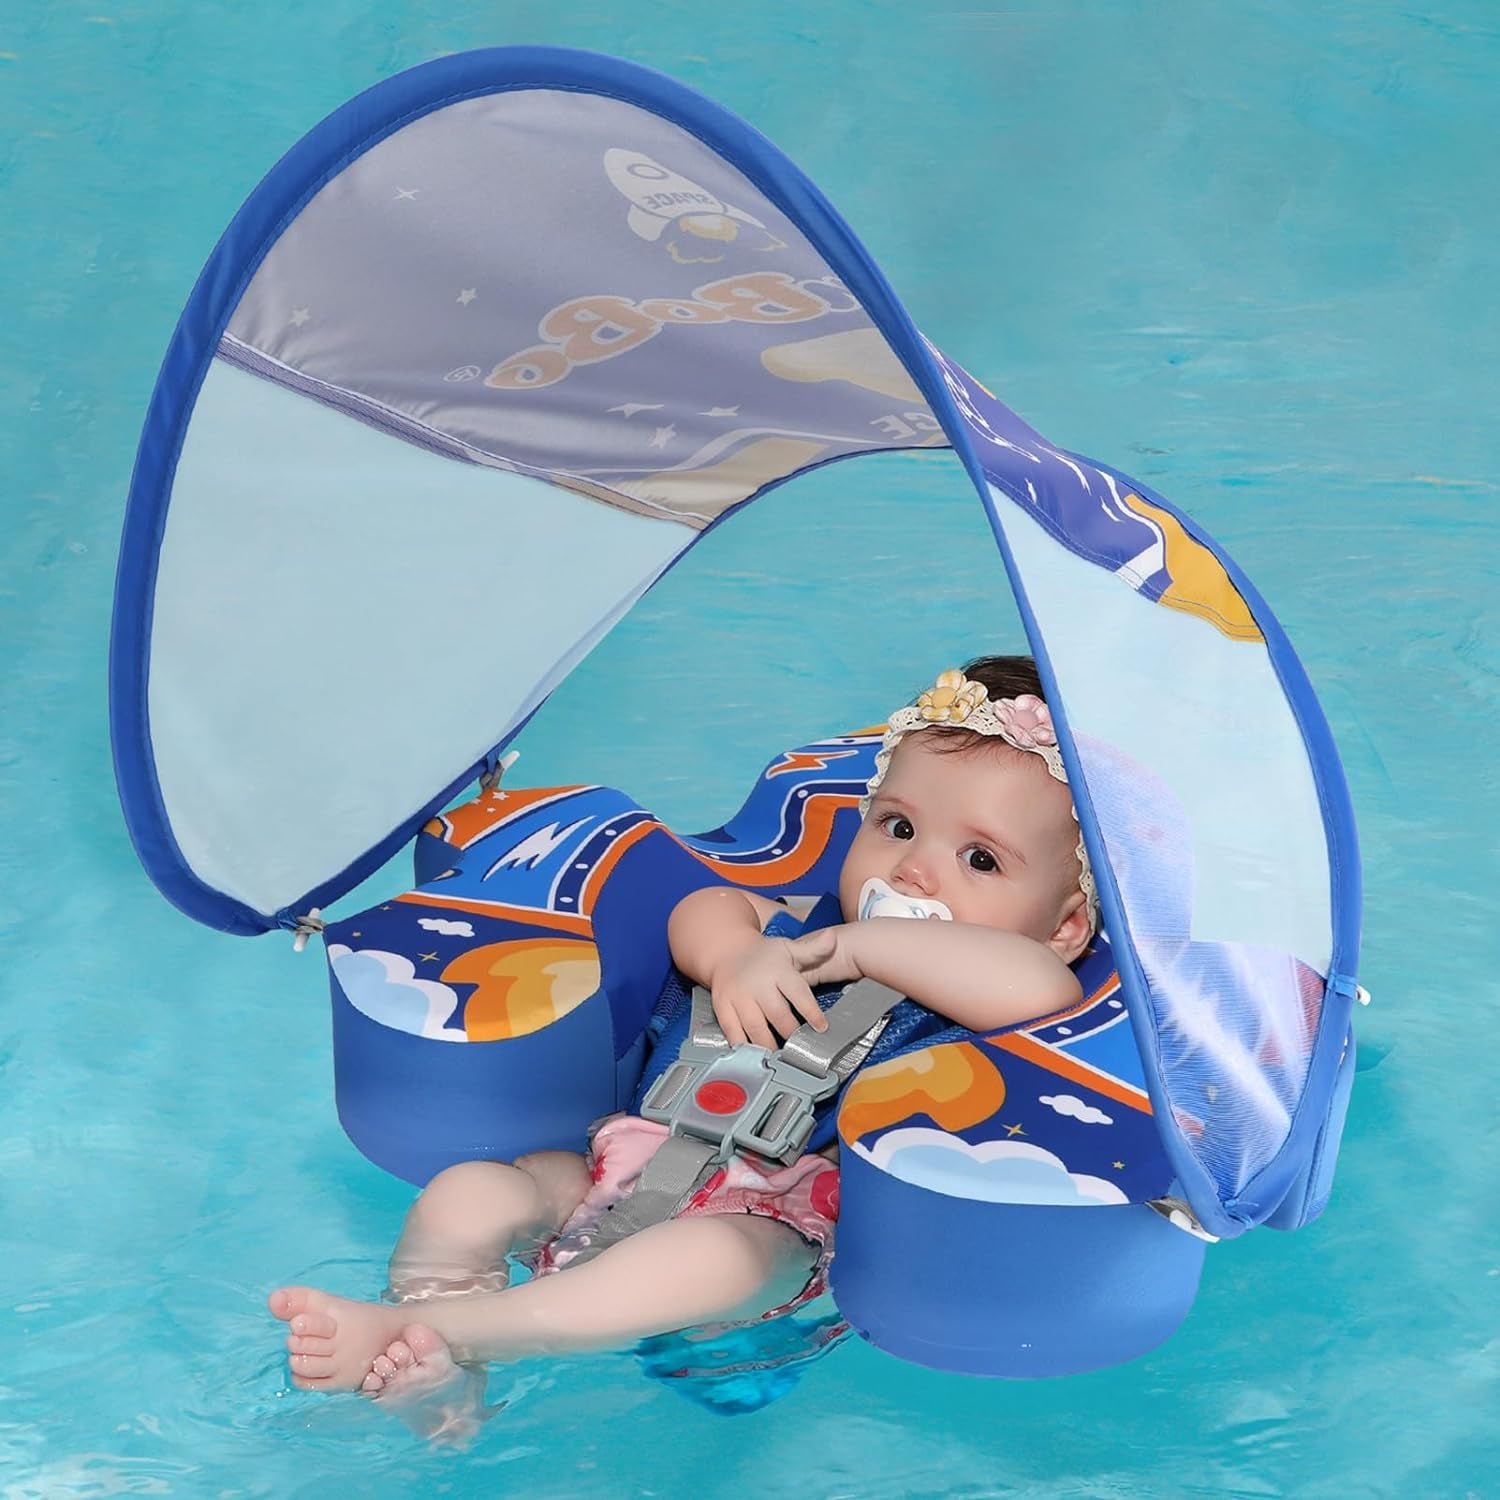 Professional title: "Swimbobo Baby Float with Canopy - Soft Skin-Friendly Fabric Material,  Infant Swim Float for Boys and Girls, Swimming Pool Toy (Blue, Large)"